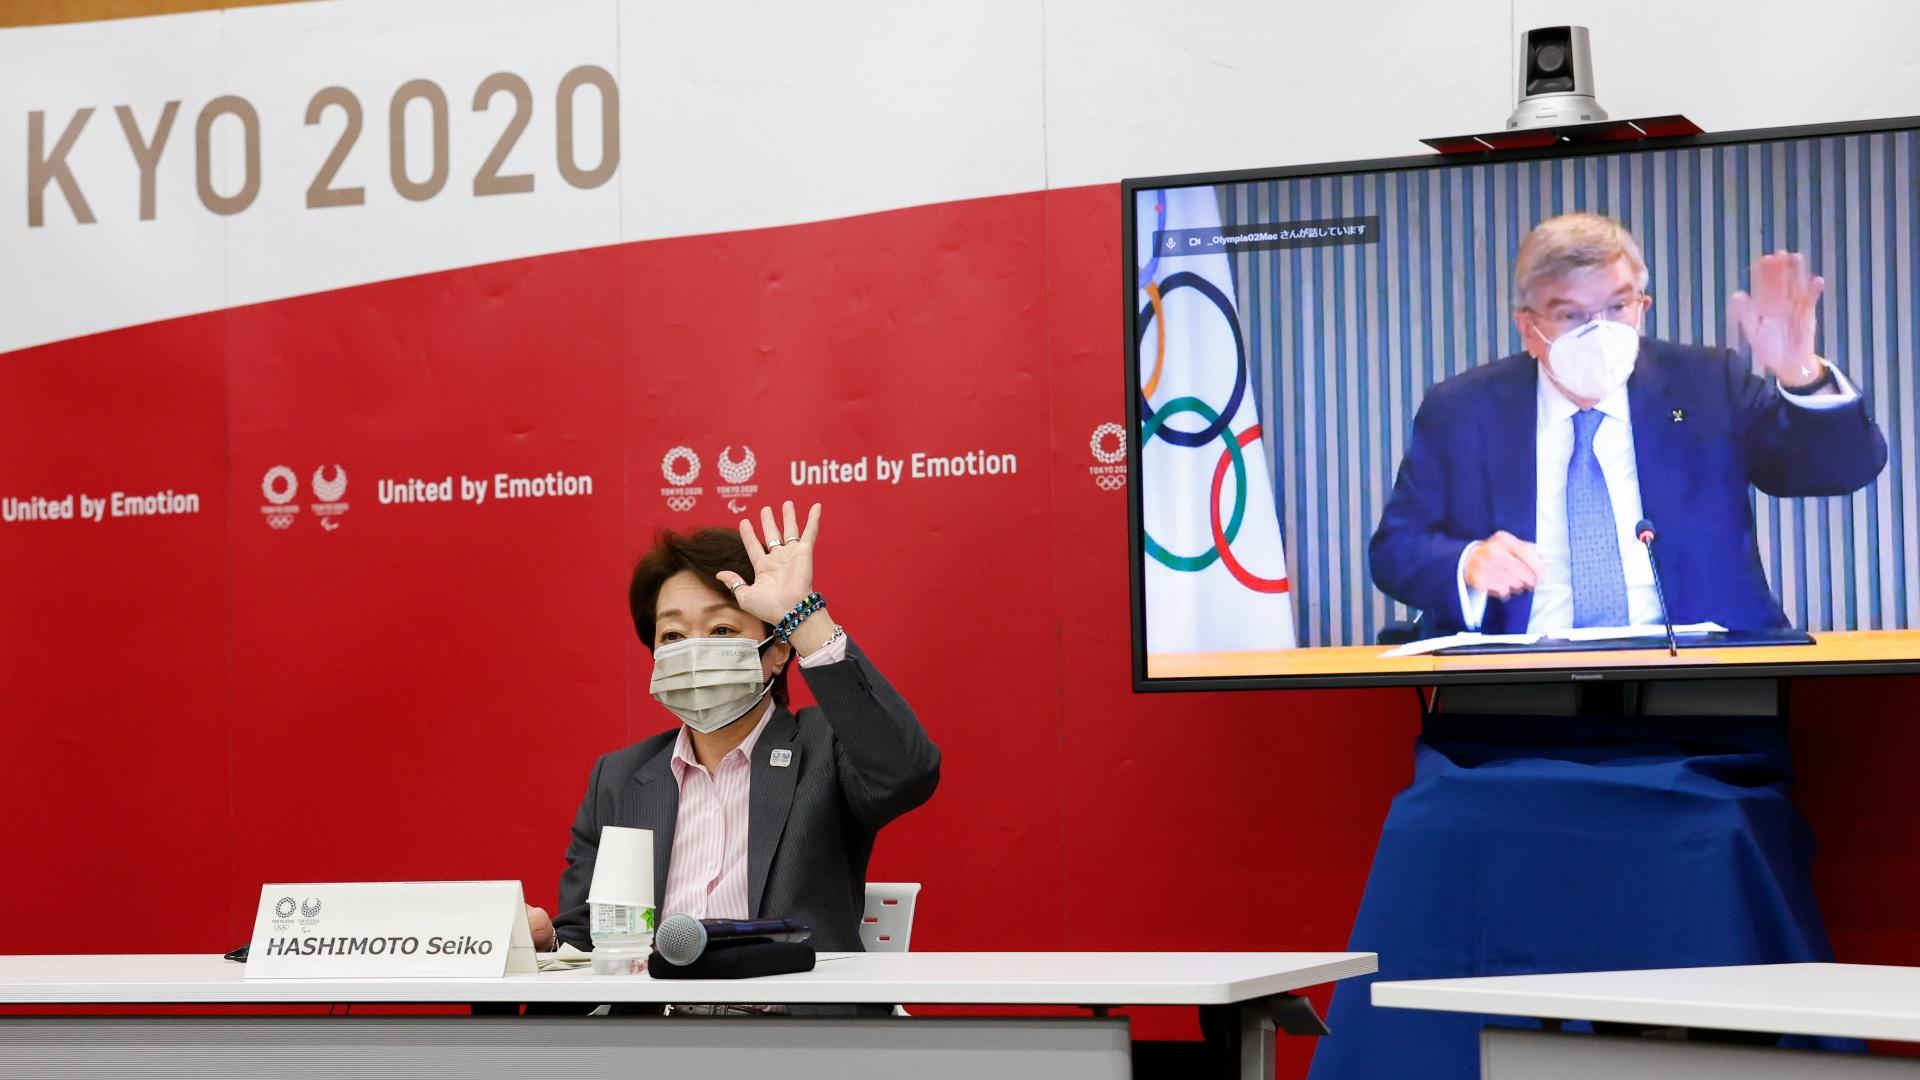 Tokyo 2020 President Seiko Hashimoto and IOC President Thomas Bach, on a screen, greet each other during a five-party online meeting at Harumi Island Triton Square Tower Y in Tokyo Monday, June 21, 2021. (Rodrigo Reyes Marin / Pool Photo via AP)